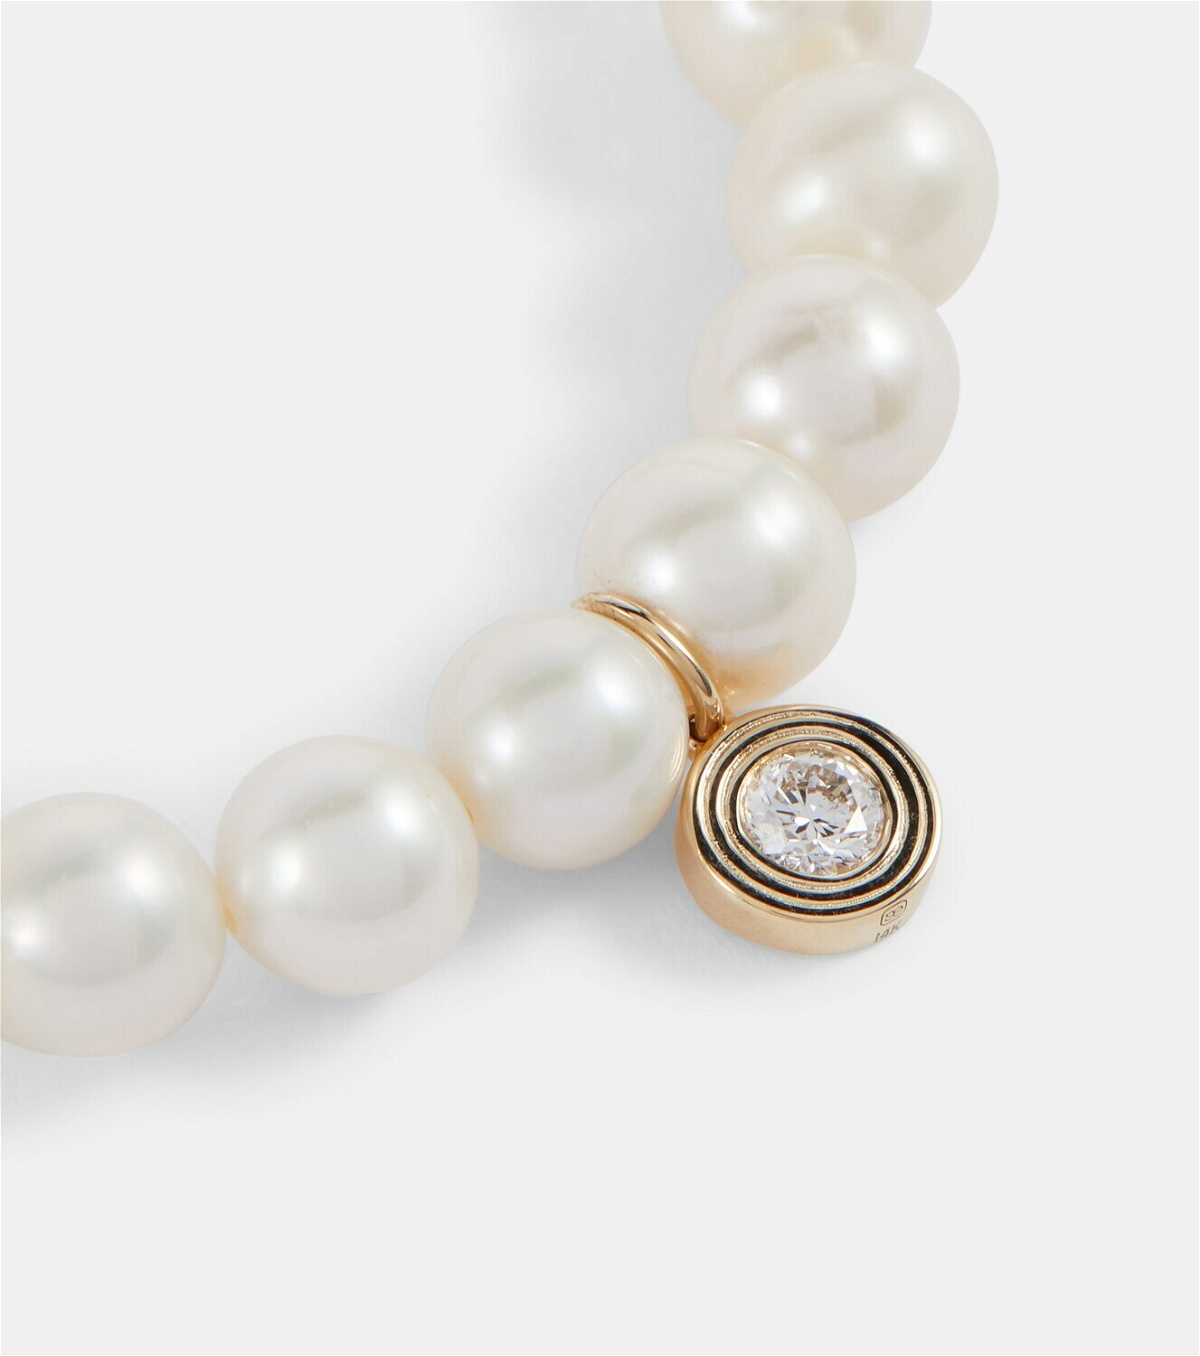 Sydney Evan 14kt gold and pearl bracelet with diamond